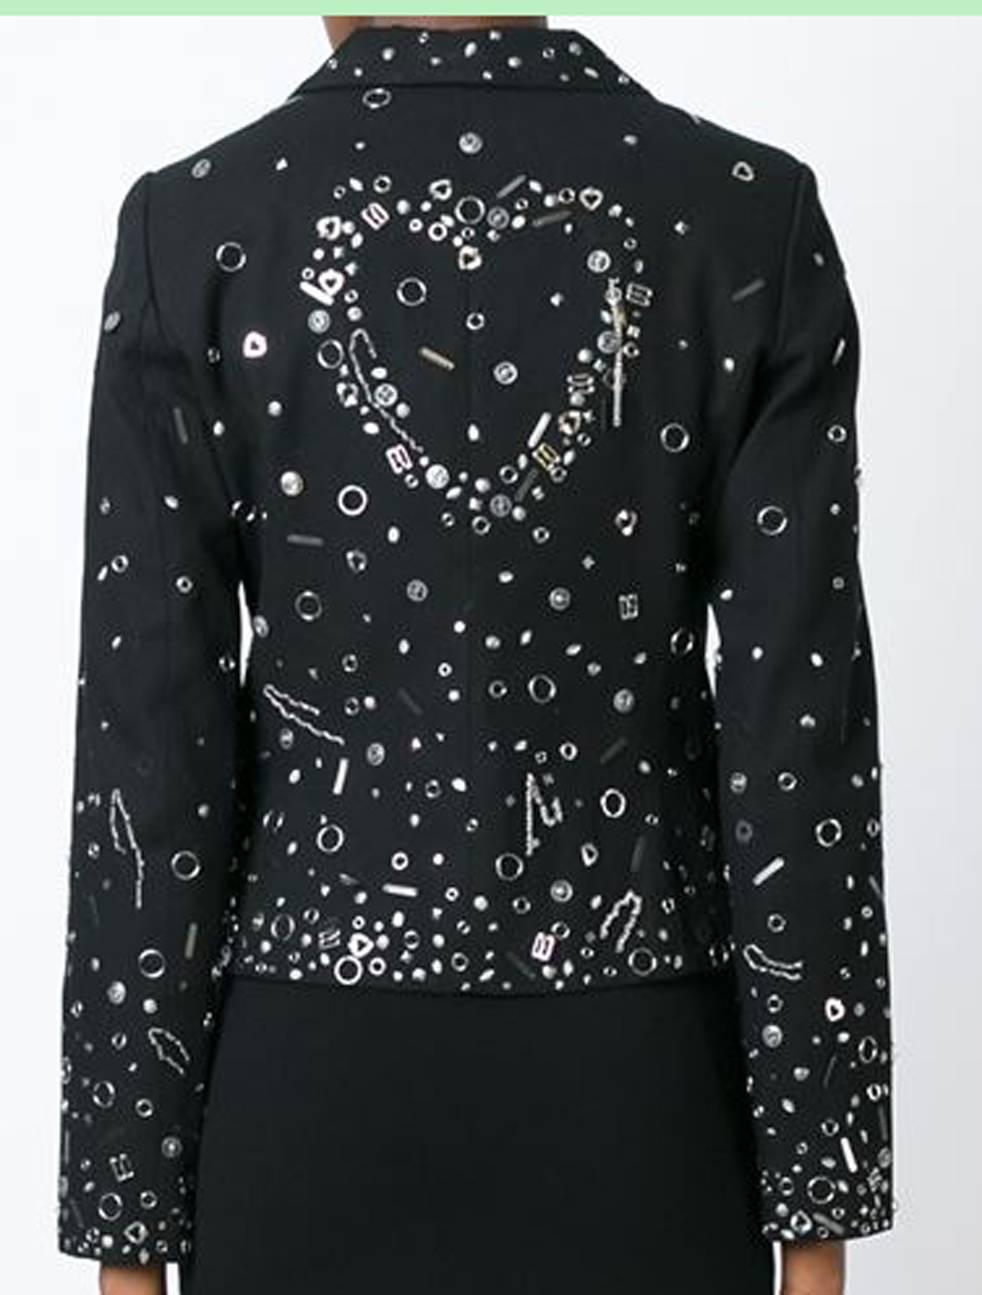 Gorgeous Moschino black stretch cotton embellished blazer featuring notched lapels, a button fastening, flap pockets and long sleeves. 
In good vintage condition. Made in Italy.
Estimated size: 36fr/ US4/ UK8
Chest 35,4in. (90cm)
Waist 30,7in